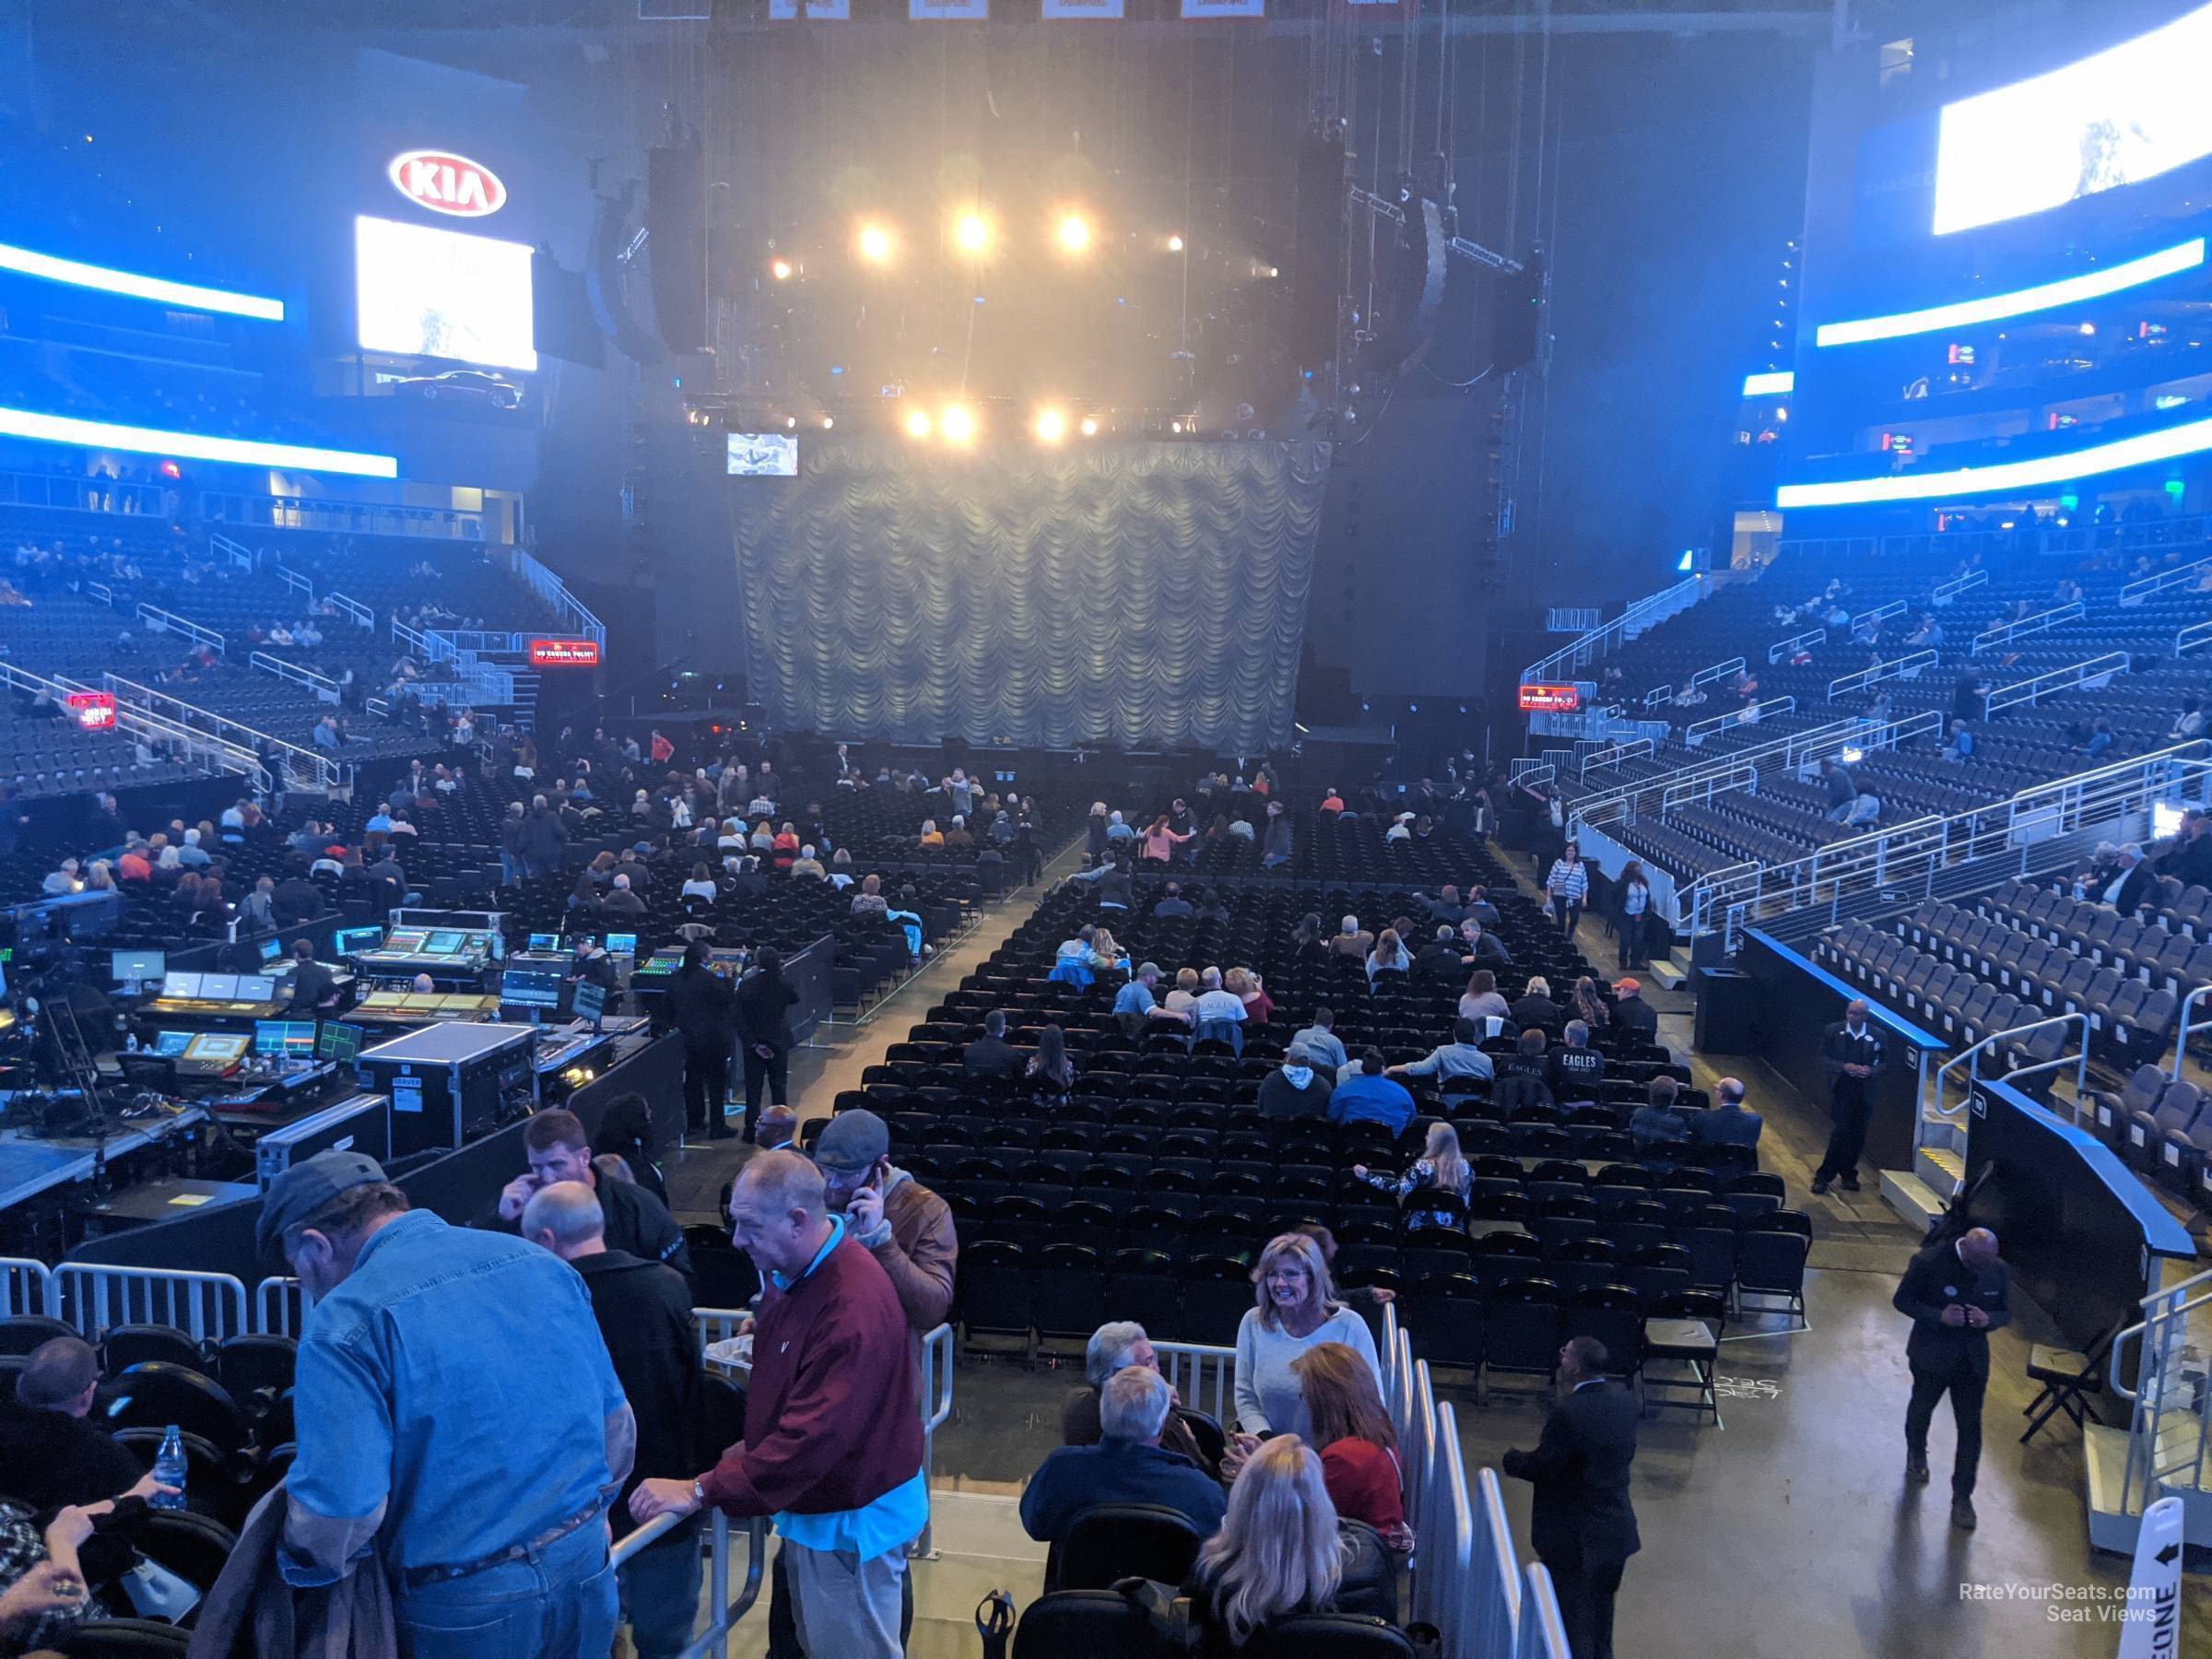 Section 112L at State Farm Arena for Concerts